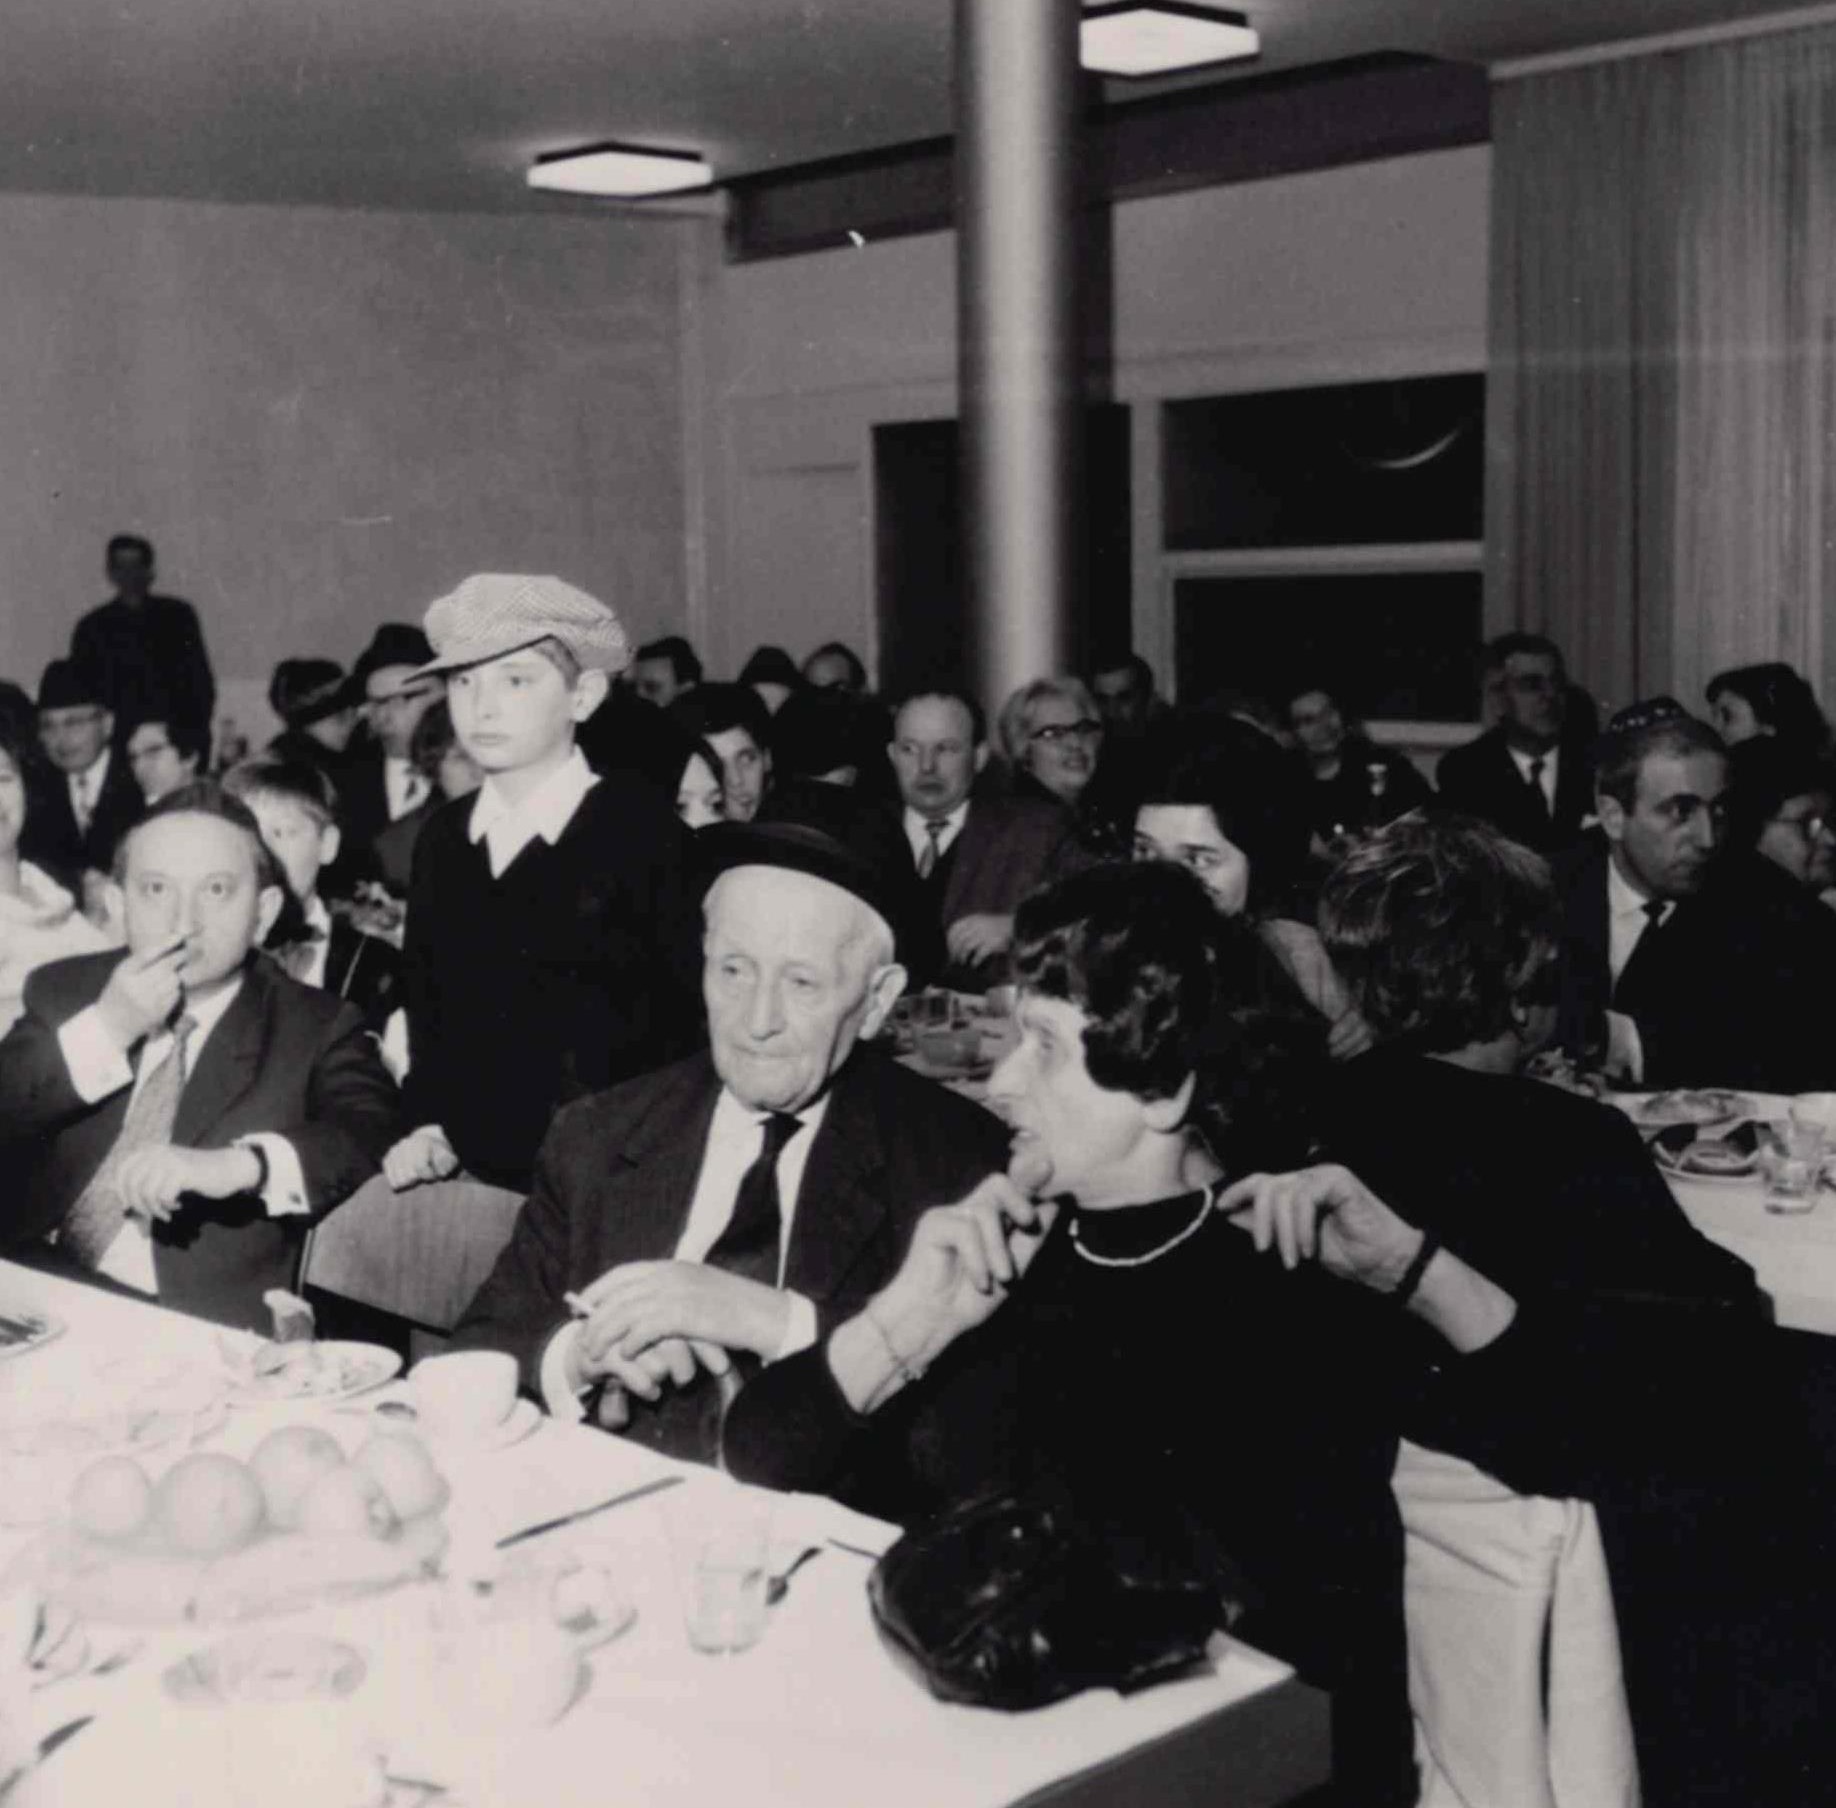 Community event in the 1960s. Collection Jewish Community Wiesbaden